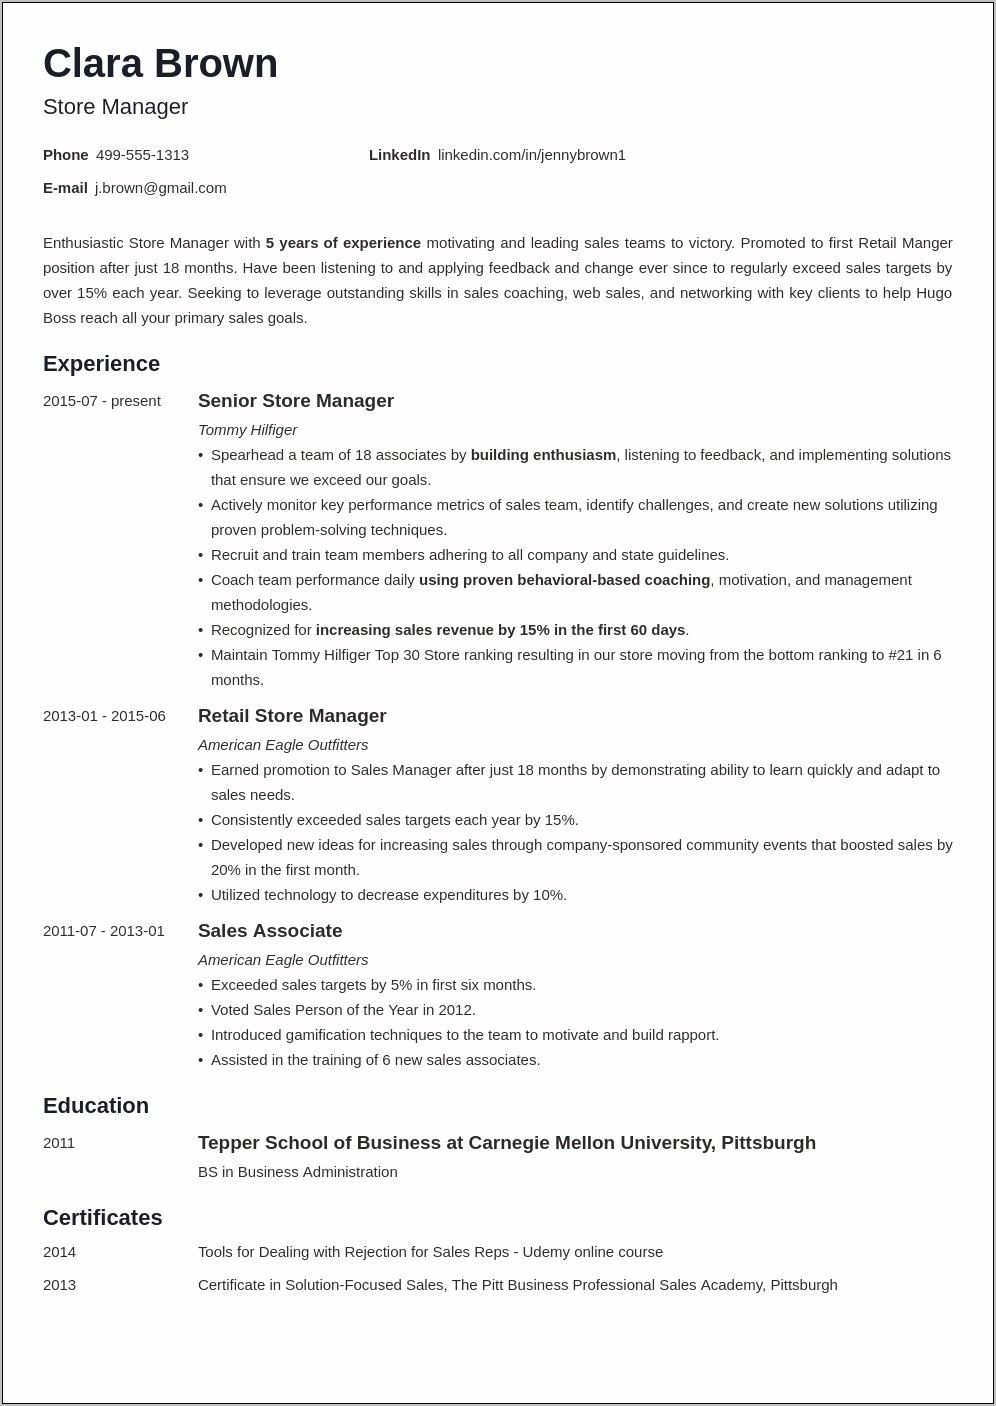 Professional Summary For Store Manager Resume